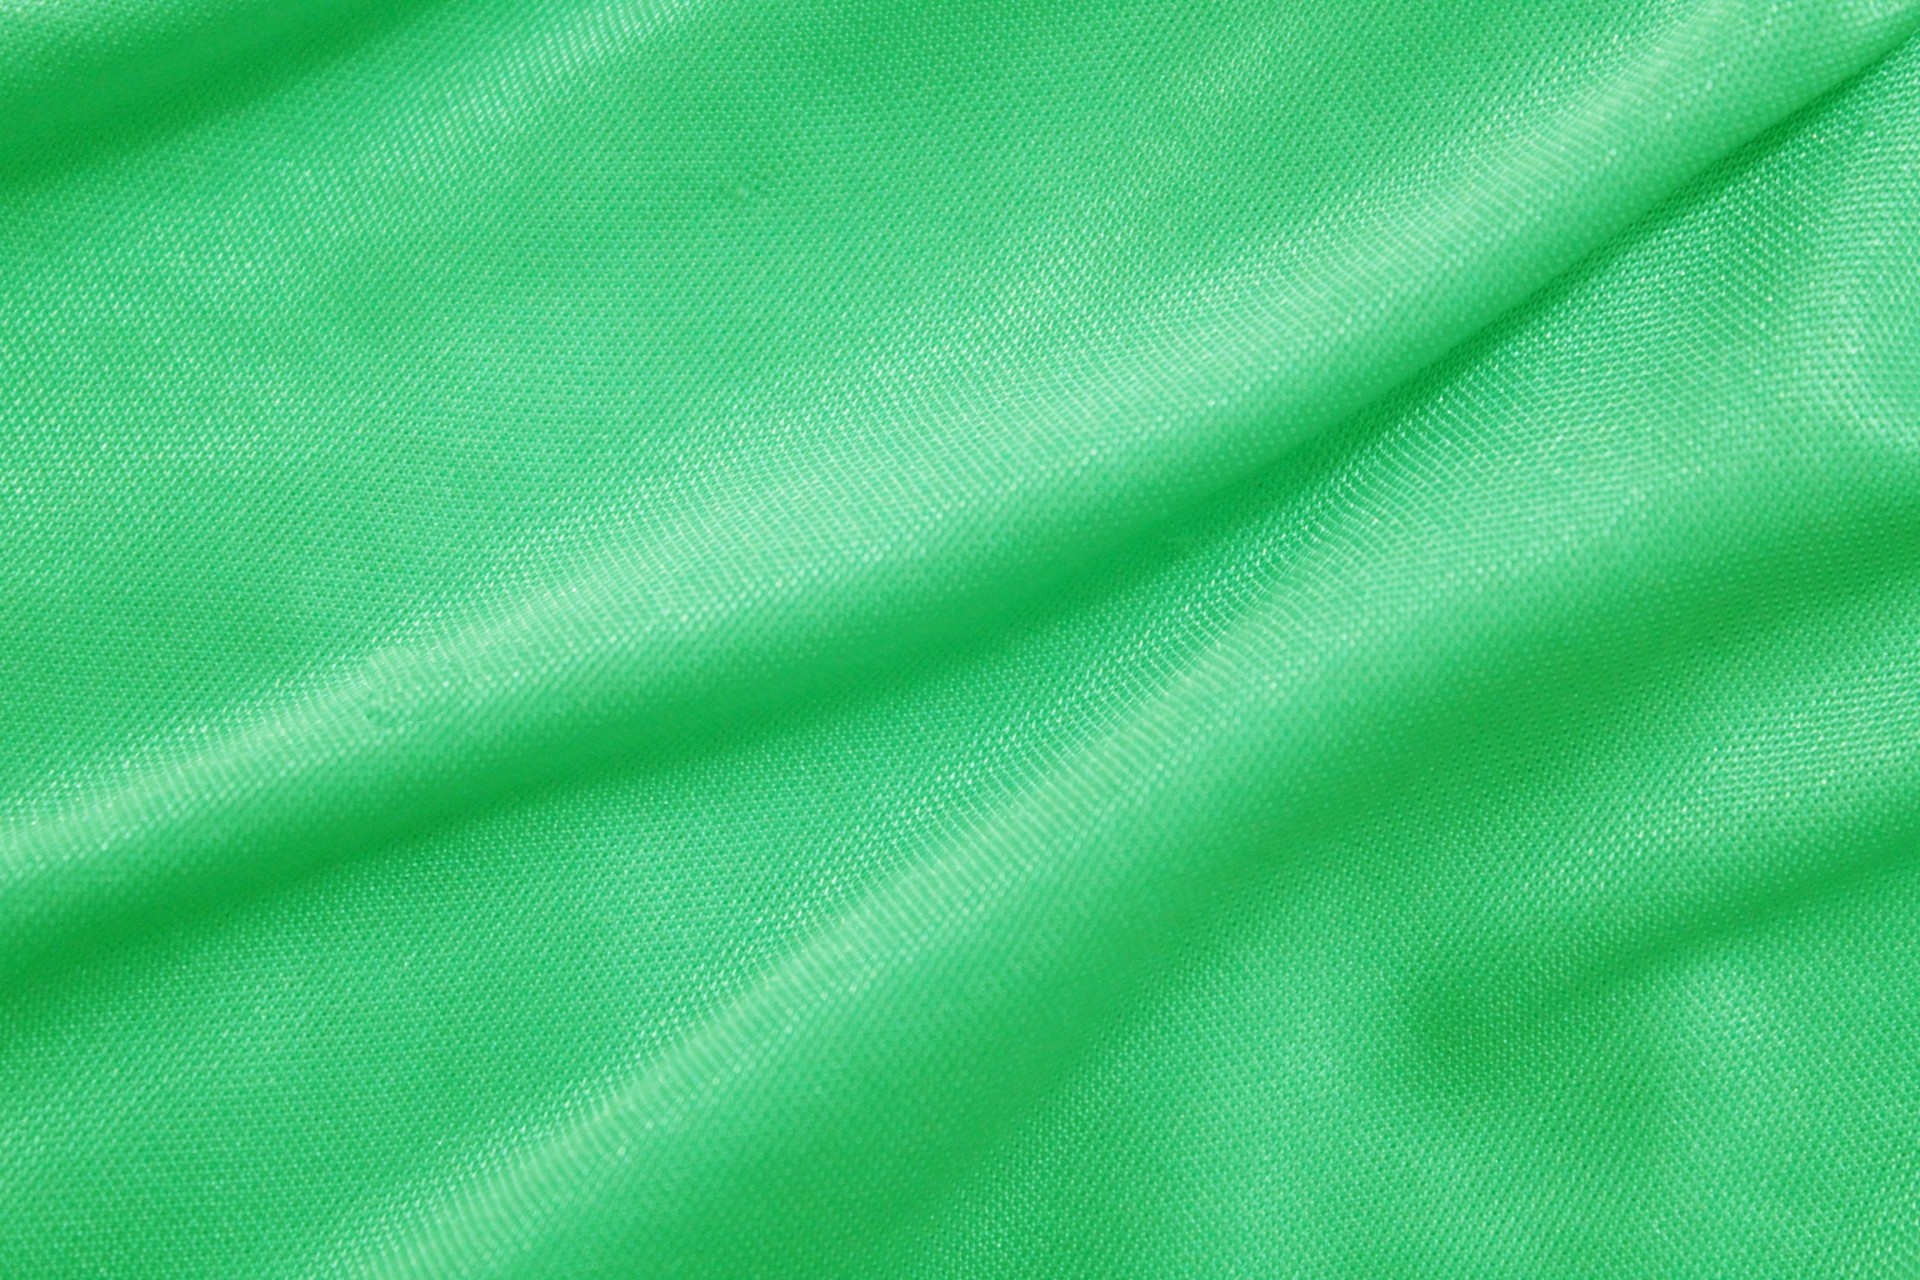 Green background,green fabric,green cloth,mint green,fabric - free image  from 